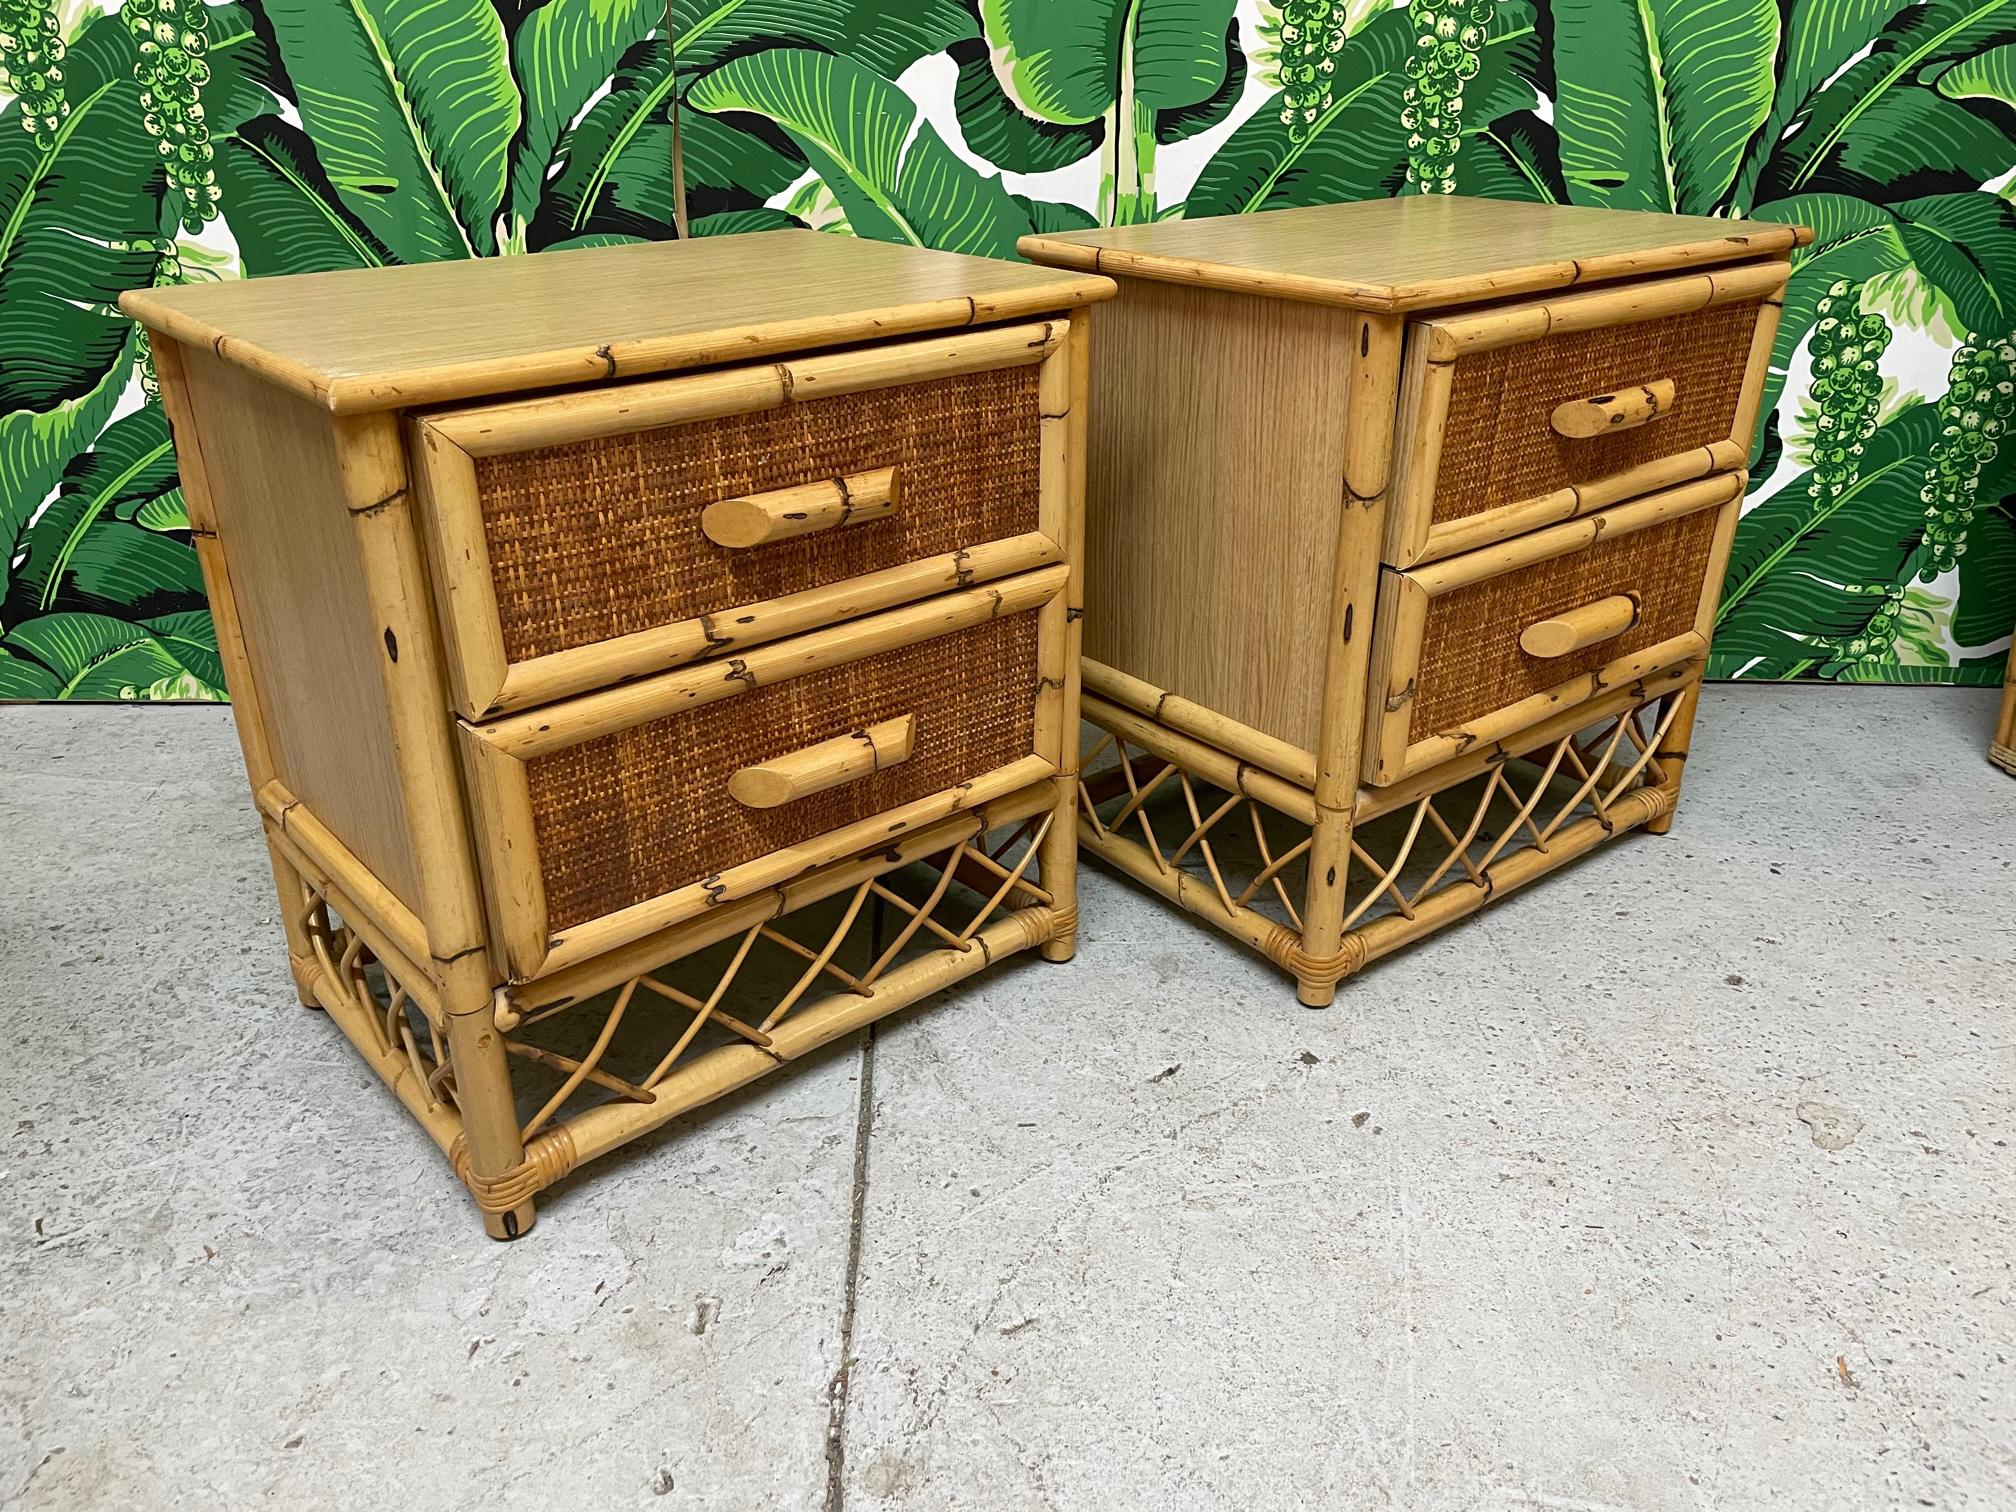 Vintage rattan nightstands feature woven wicker drawer fronts and fretwork skirts. Good condition with imperfections consistent with age, see photos for condition details. 
For a shipping quote to your exact zip code, please message us.
